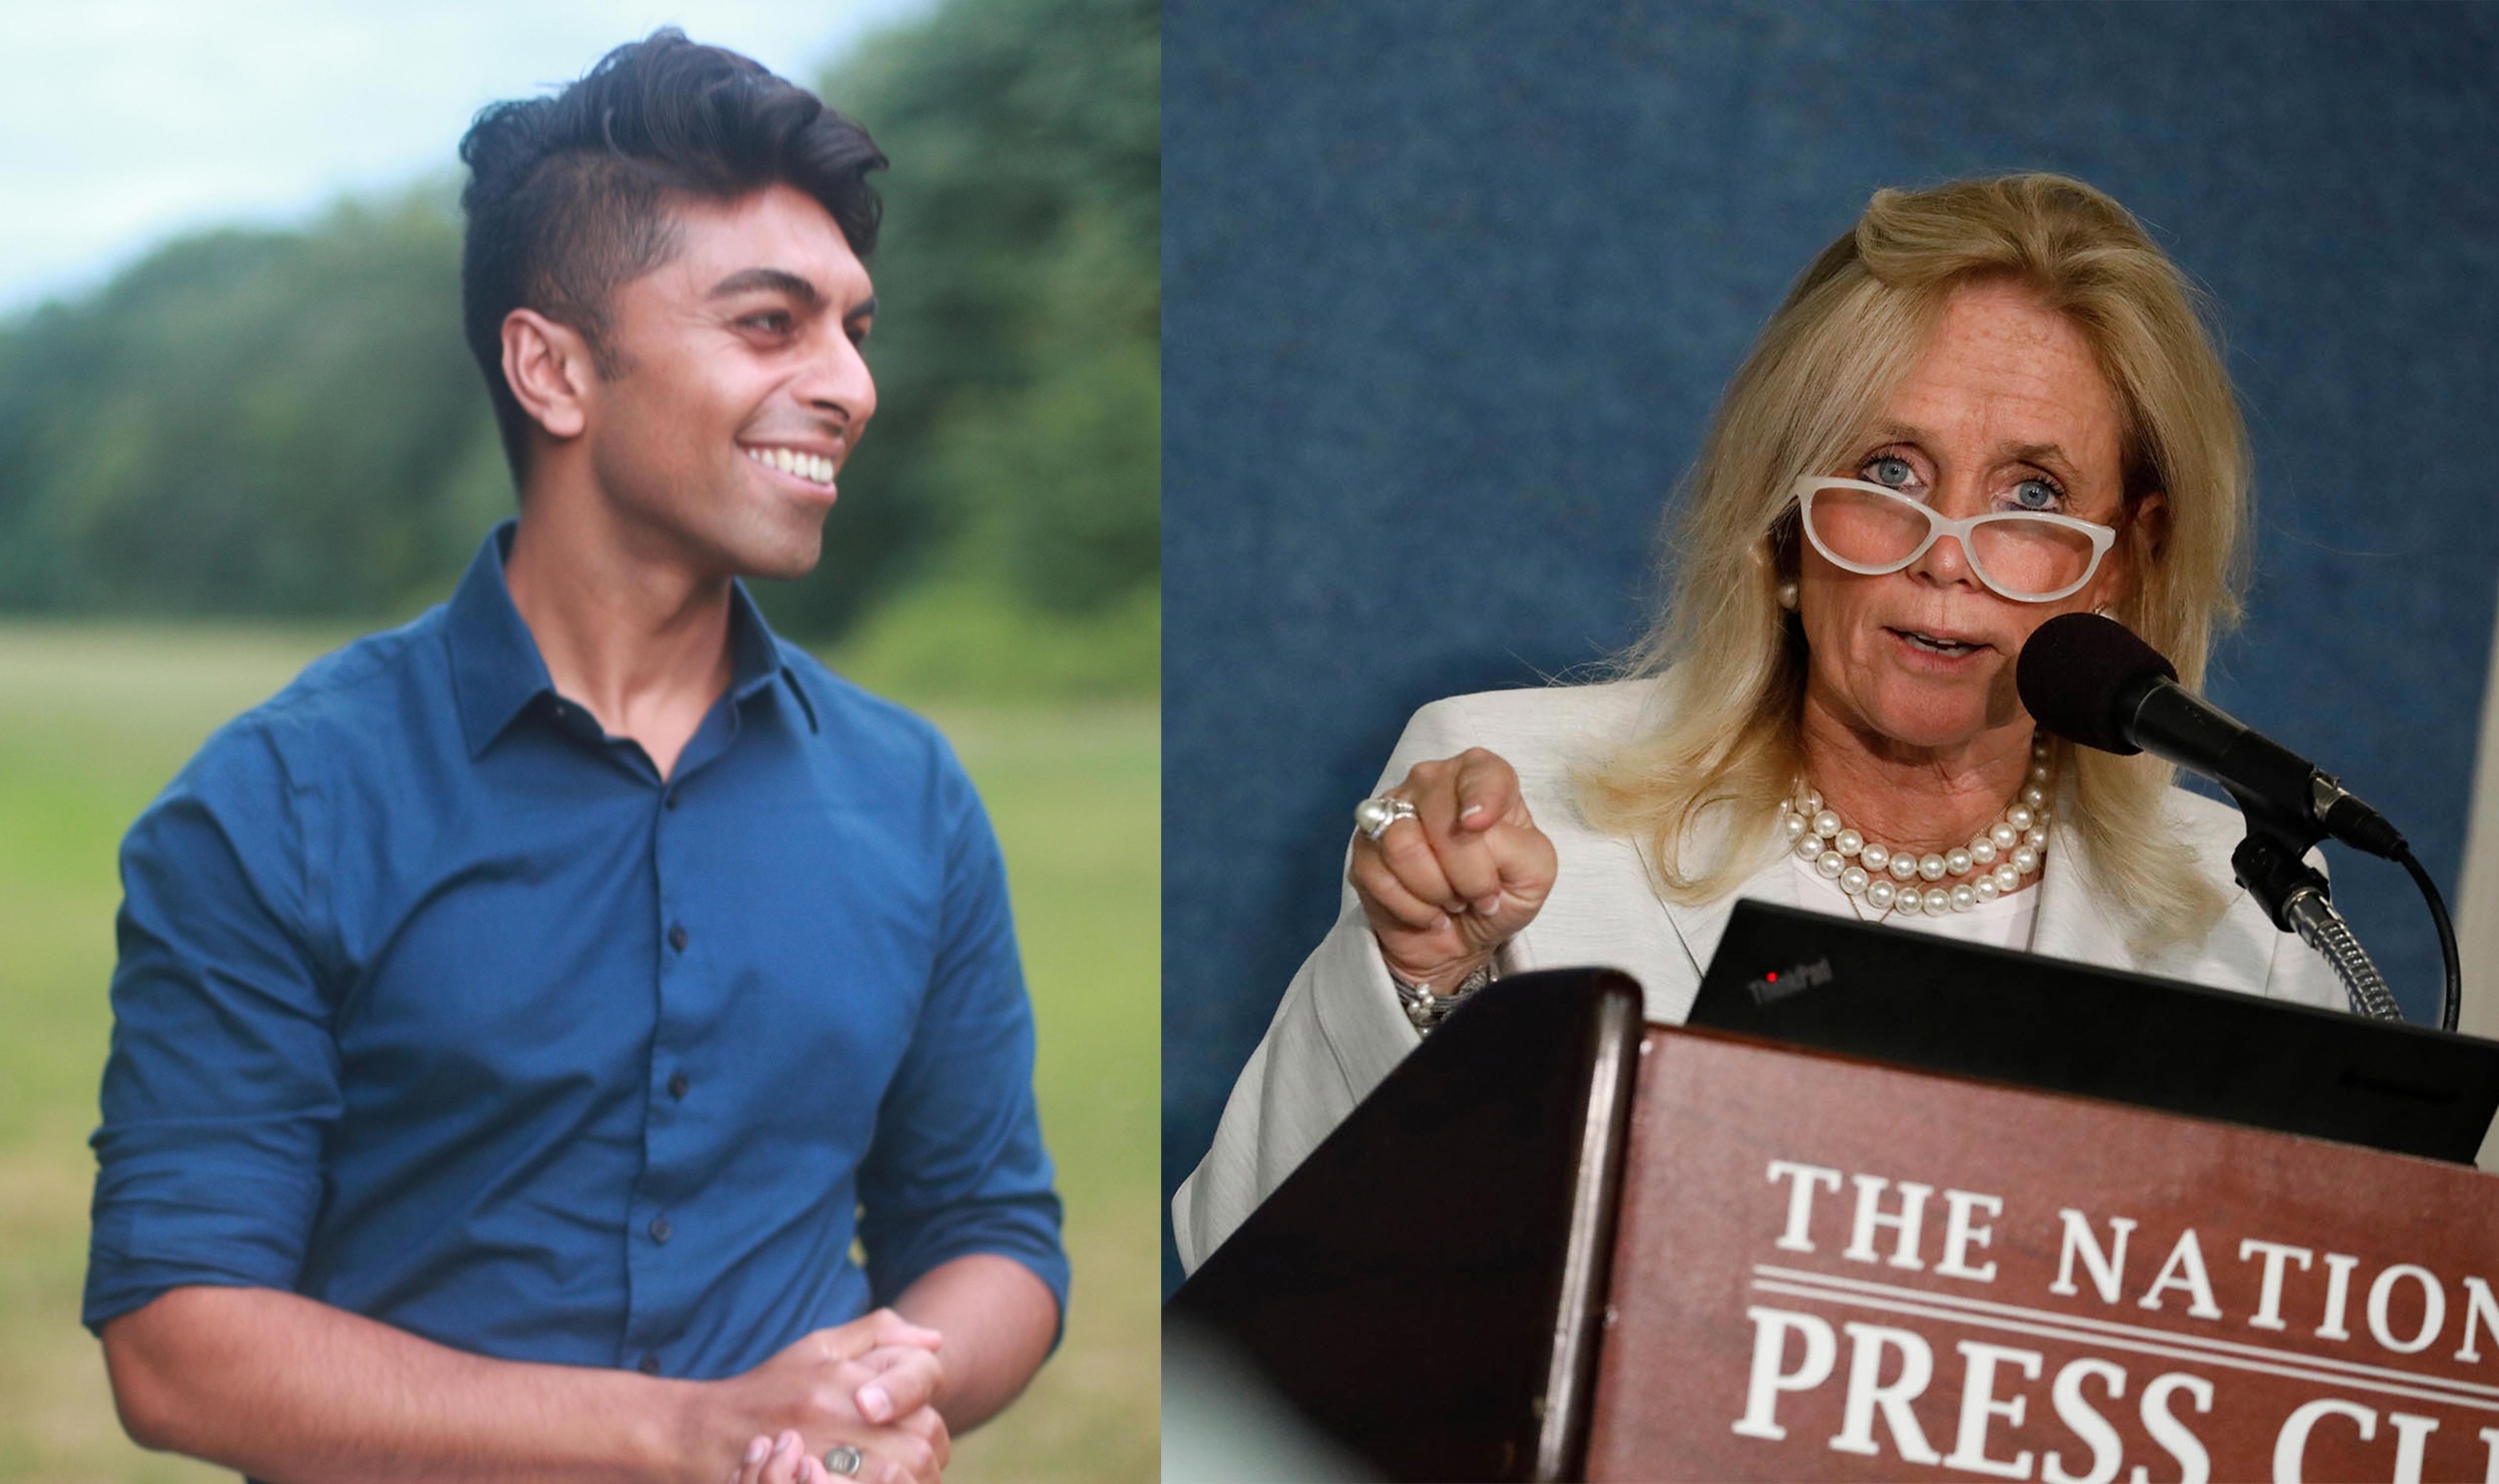 Dingell has done extensive outreach to the Arab community and has raised 10 times the amount of money that Rajput has.